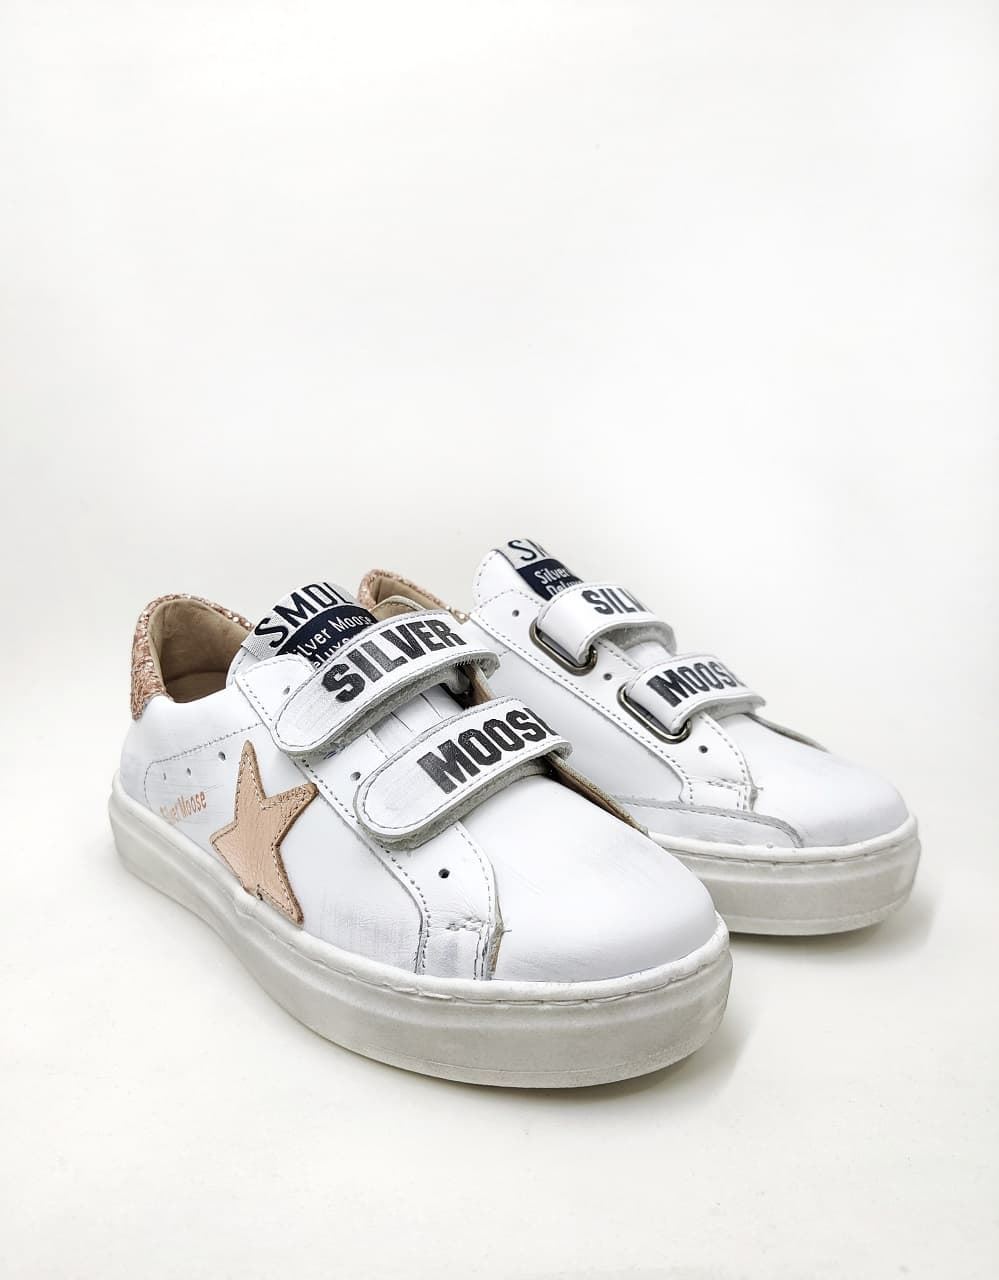 Golden Star White Glitter Nude leather sneakers with Velcro Yowas - Image 4